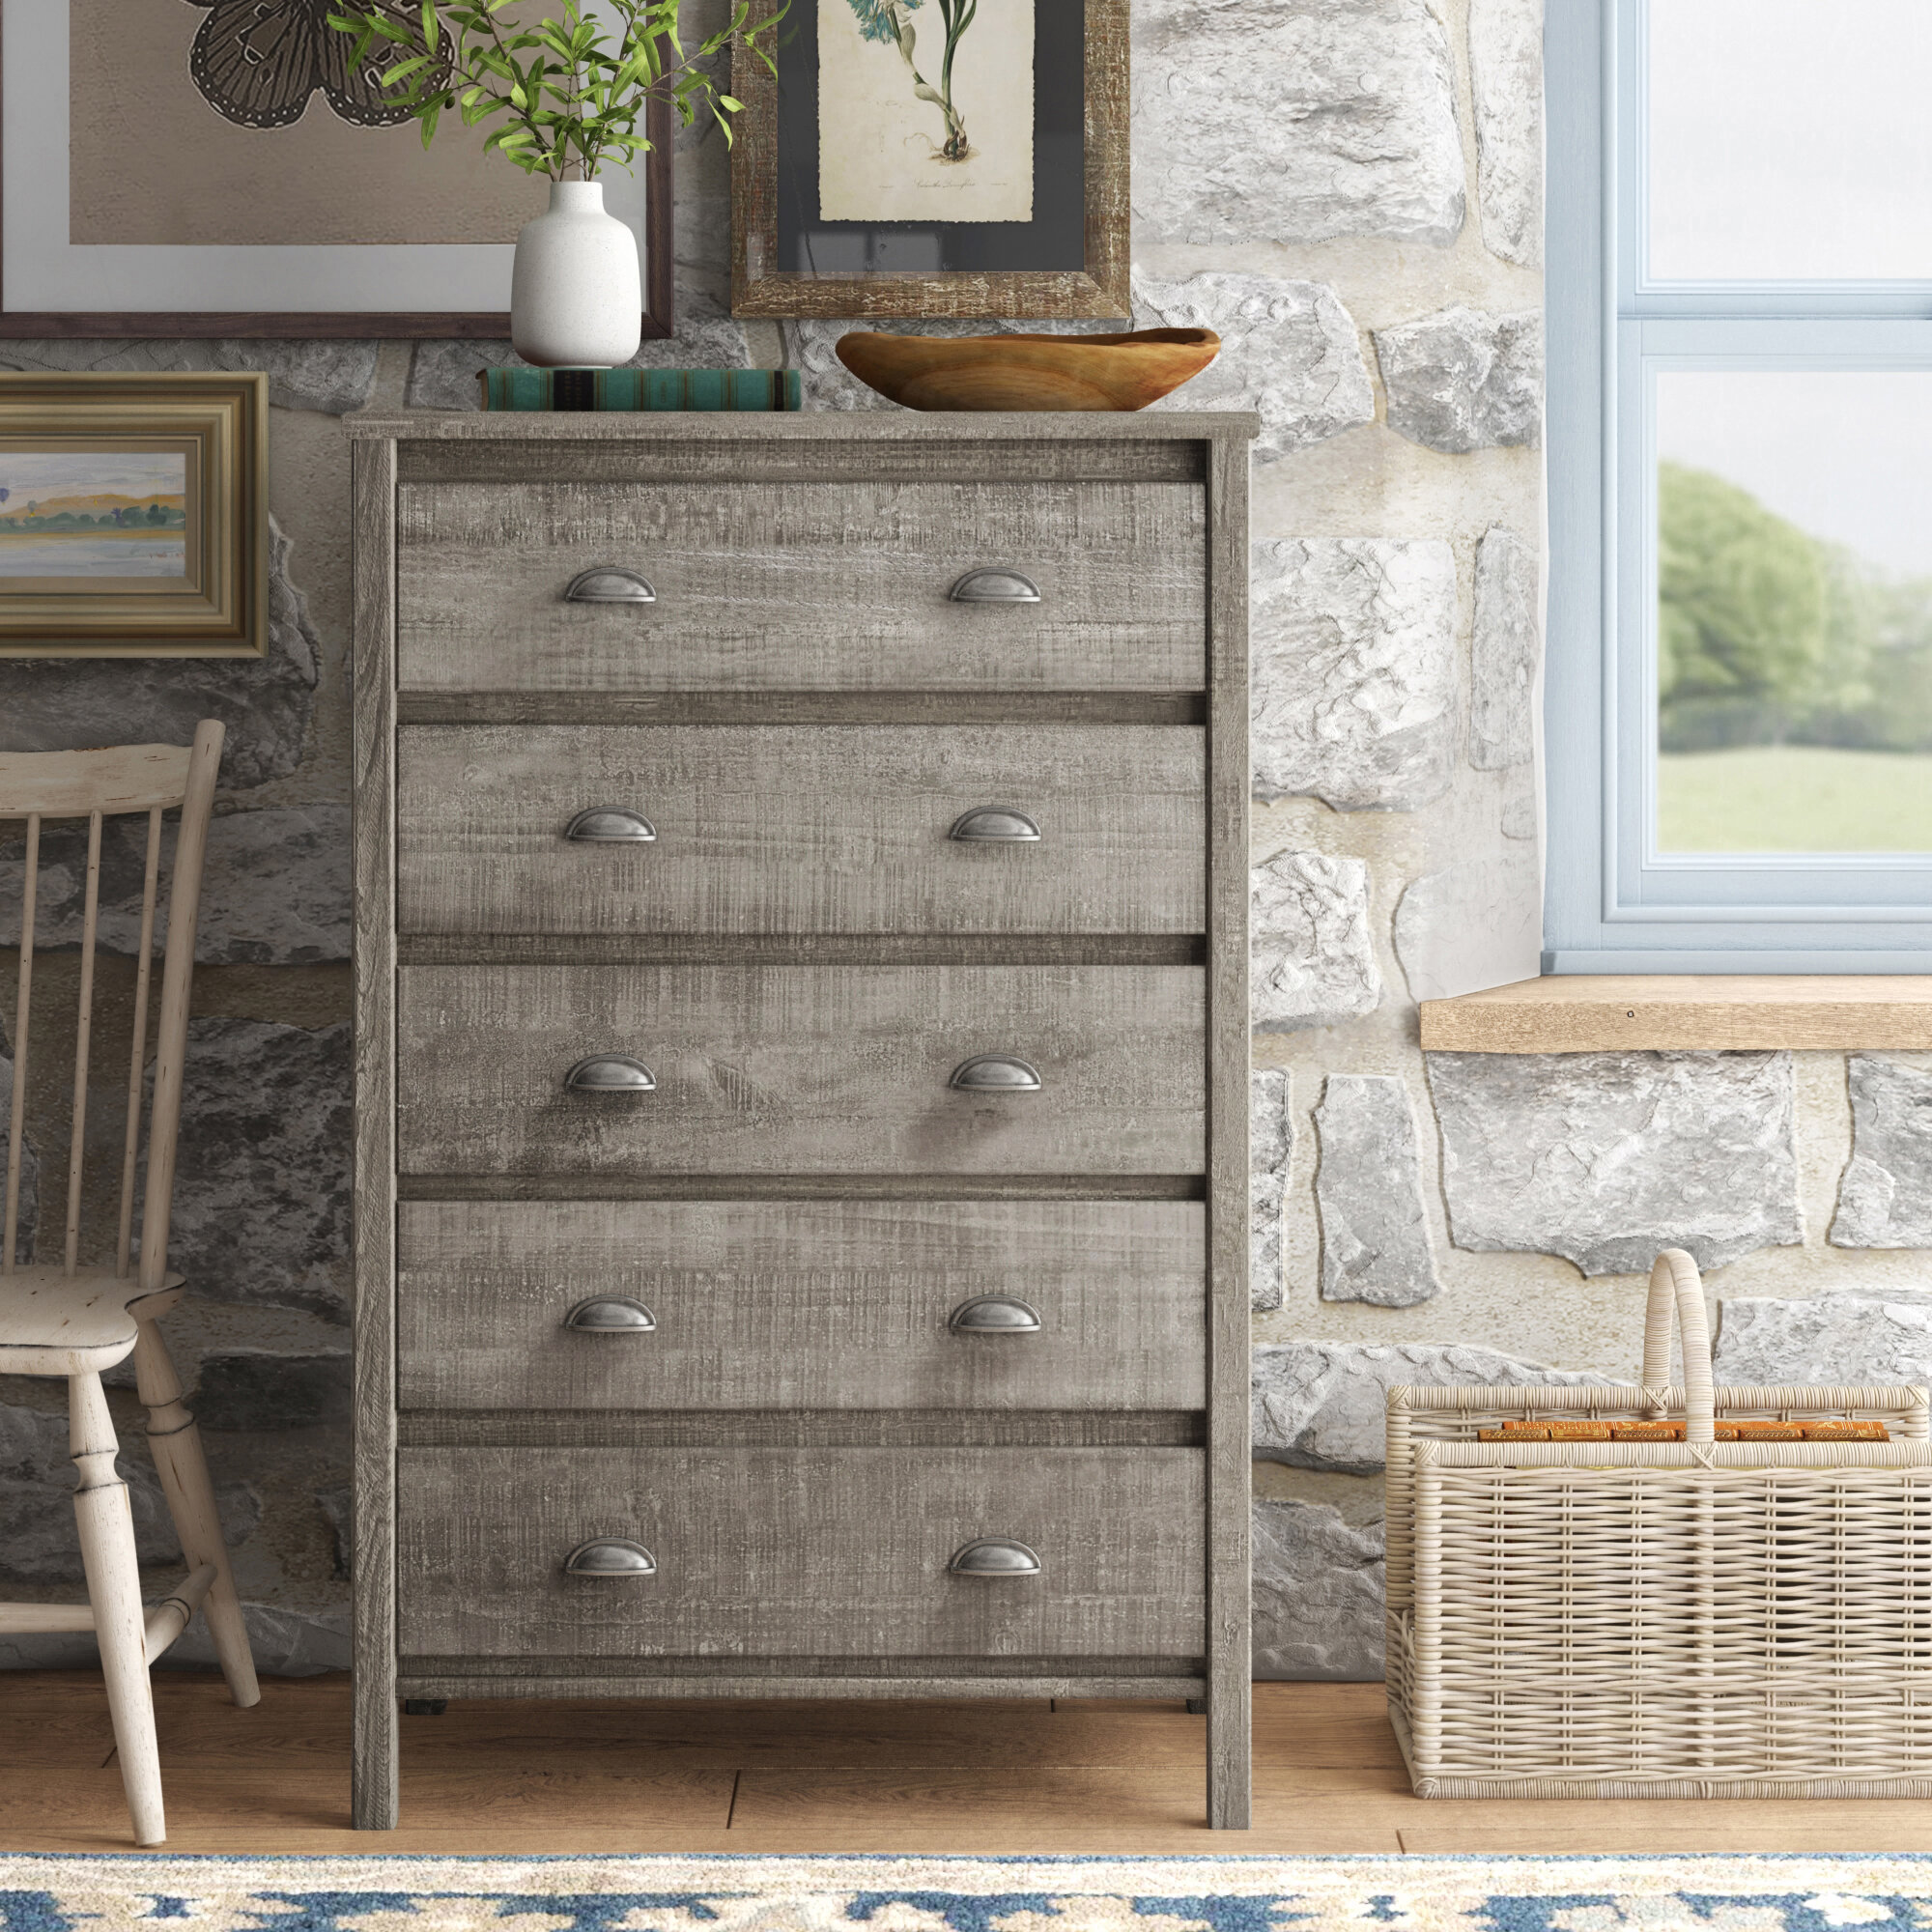 Wayfair Rustic Dressers Chests You Ll Love In 2021